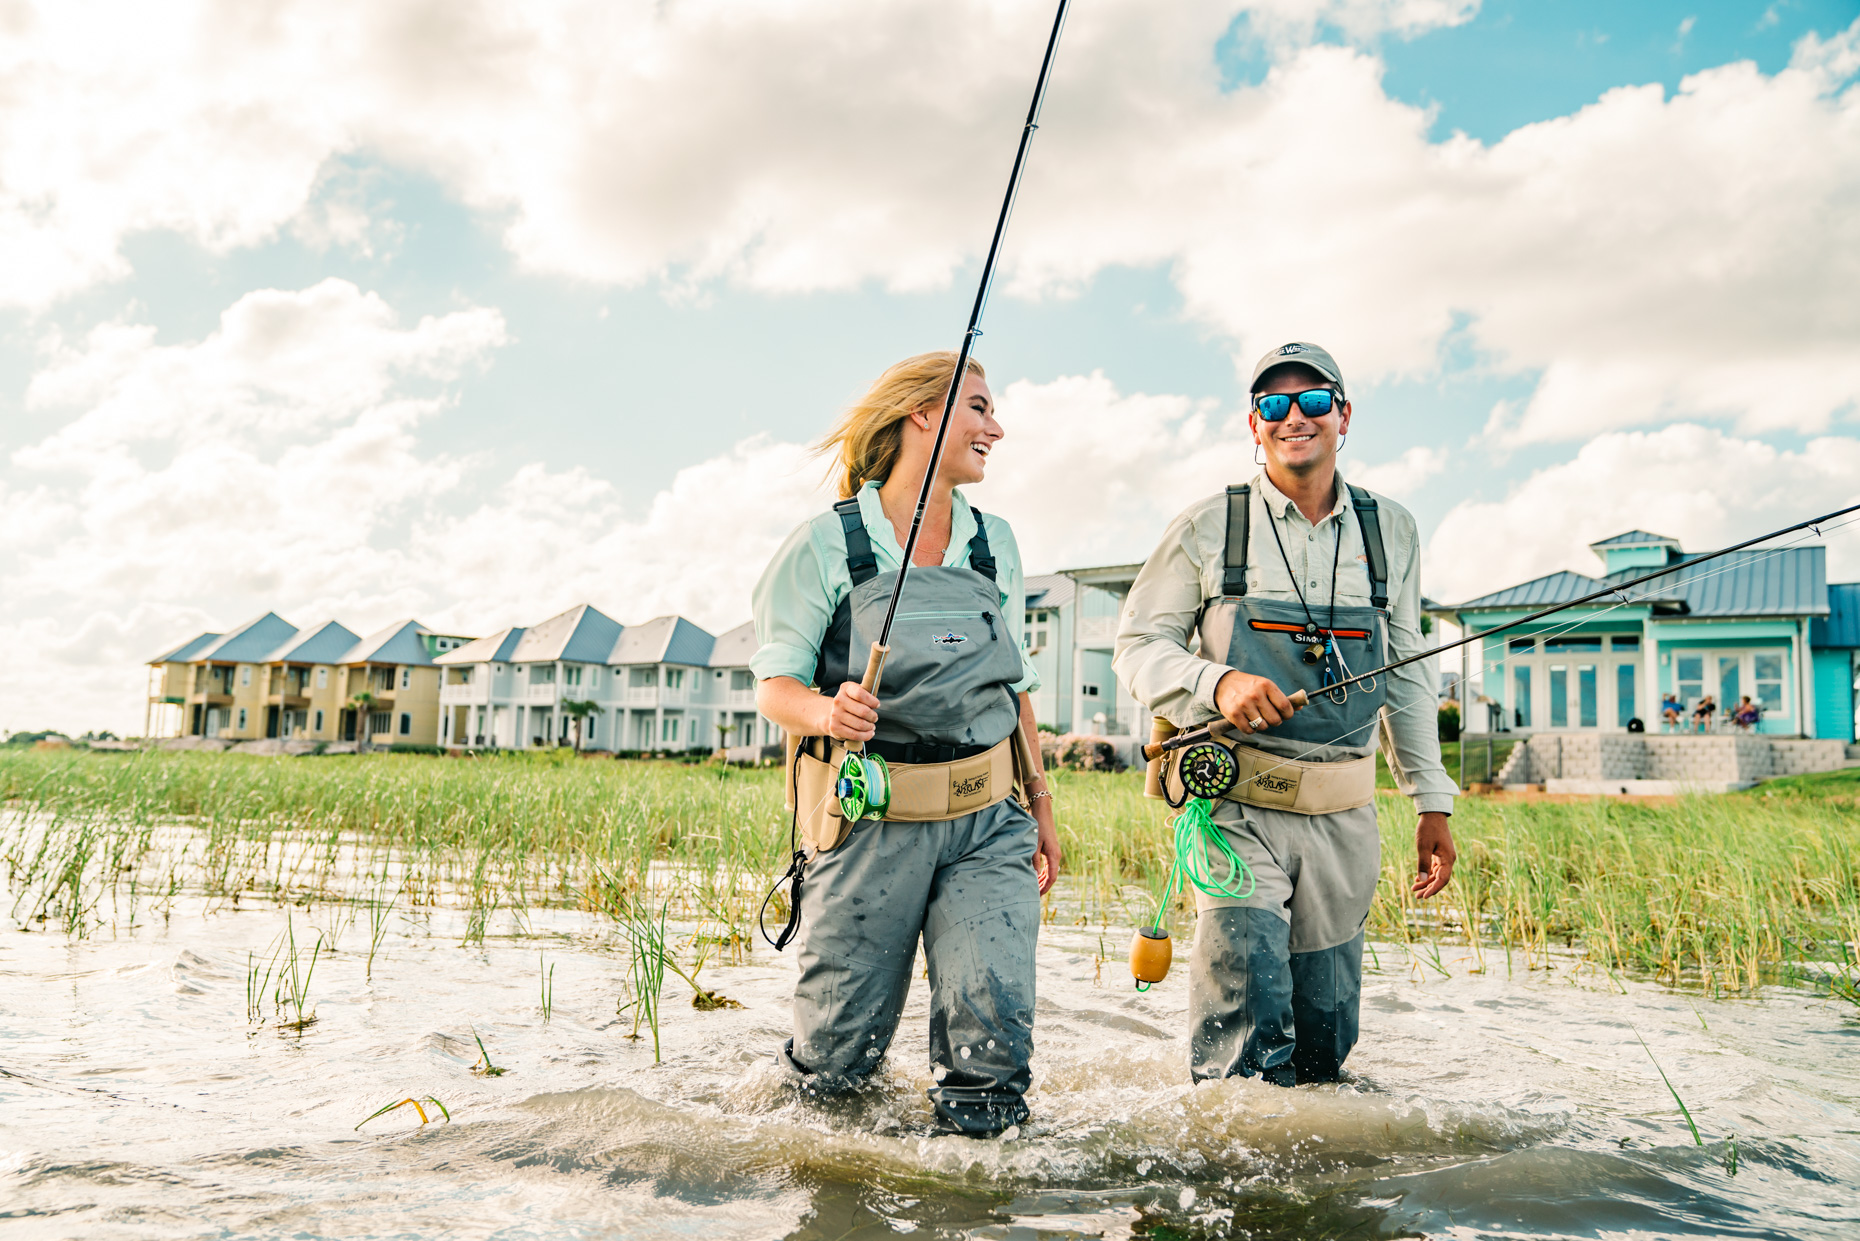 Smiling-woman-and-man-fly-fishing-is20190614_SCB_3211Inti-St-Clair-Austin-TX